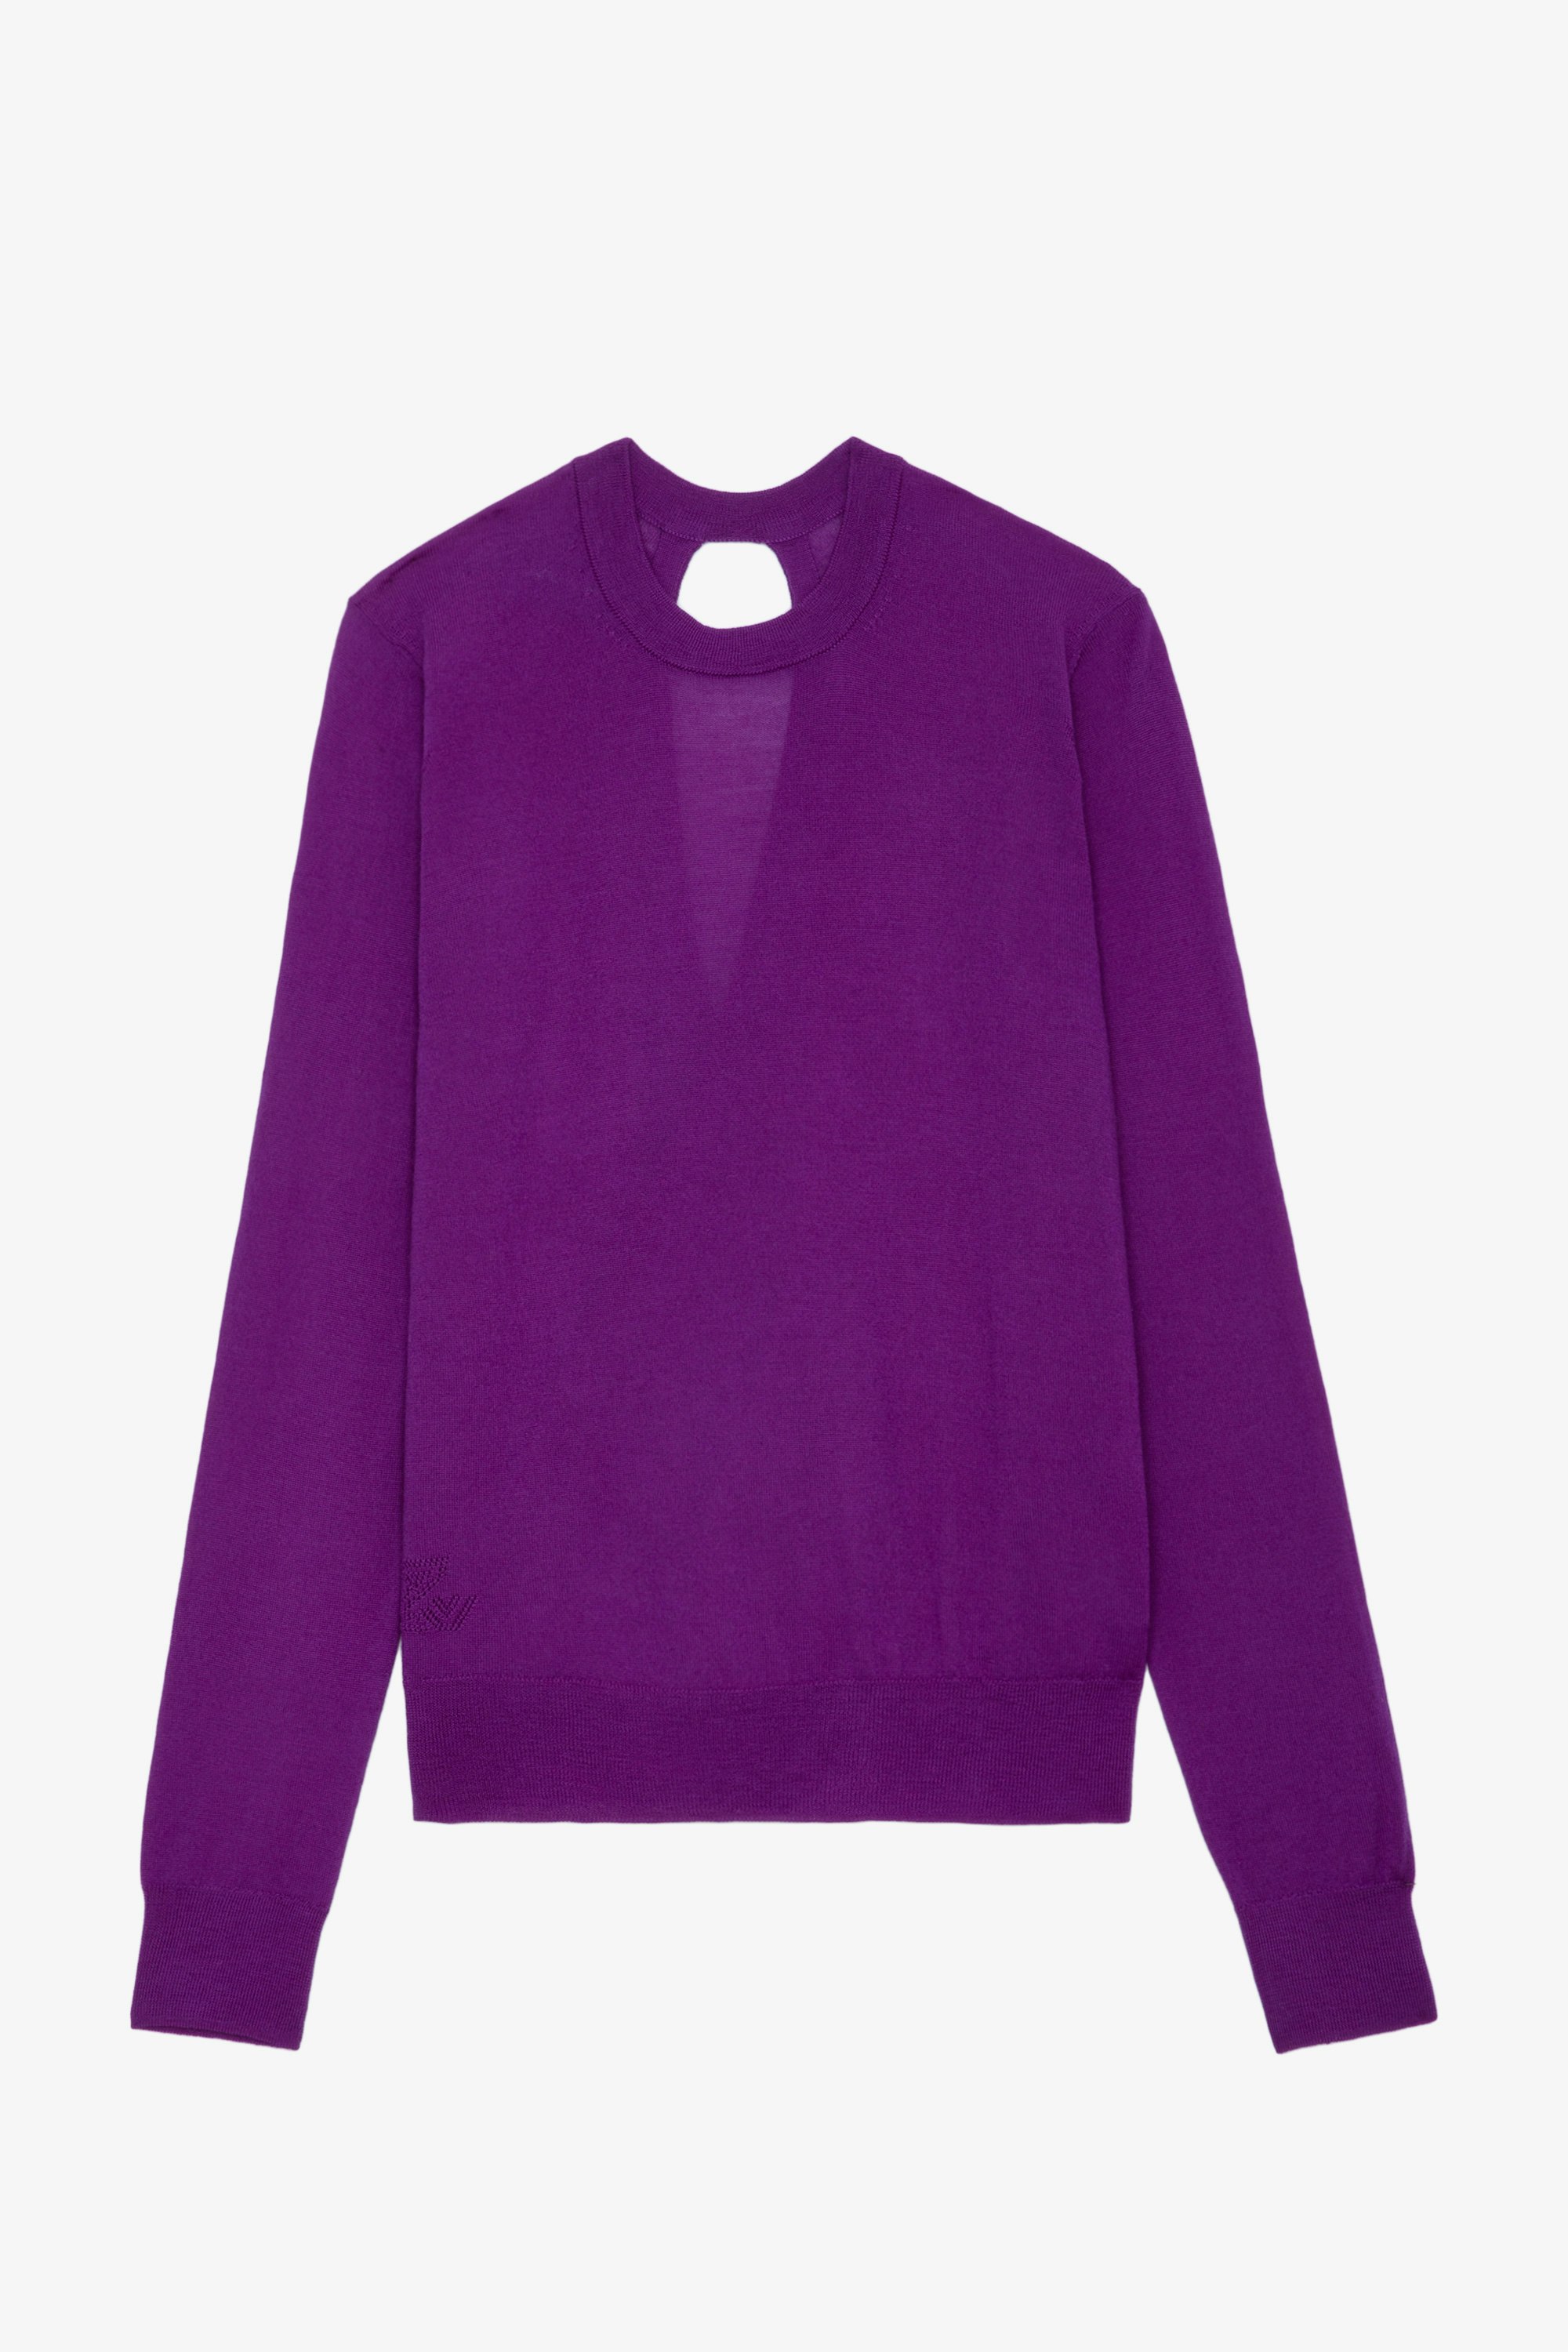 Emma Sweater - Purple merino wool round-neck sweater with long sleeves and open crossover back.